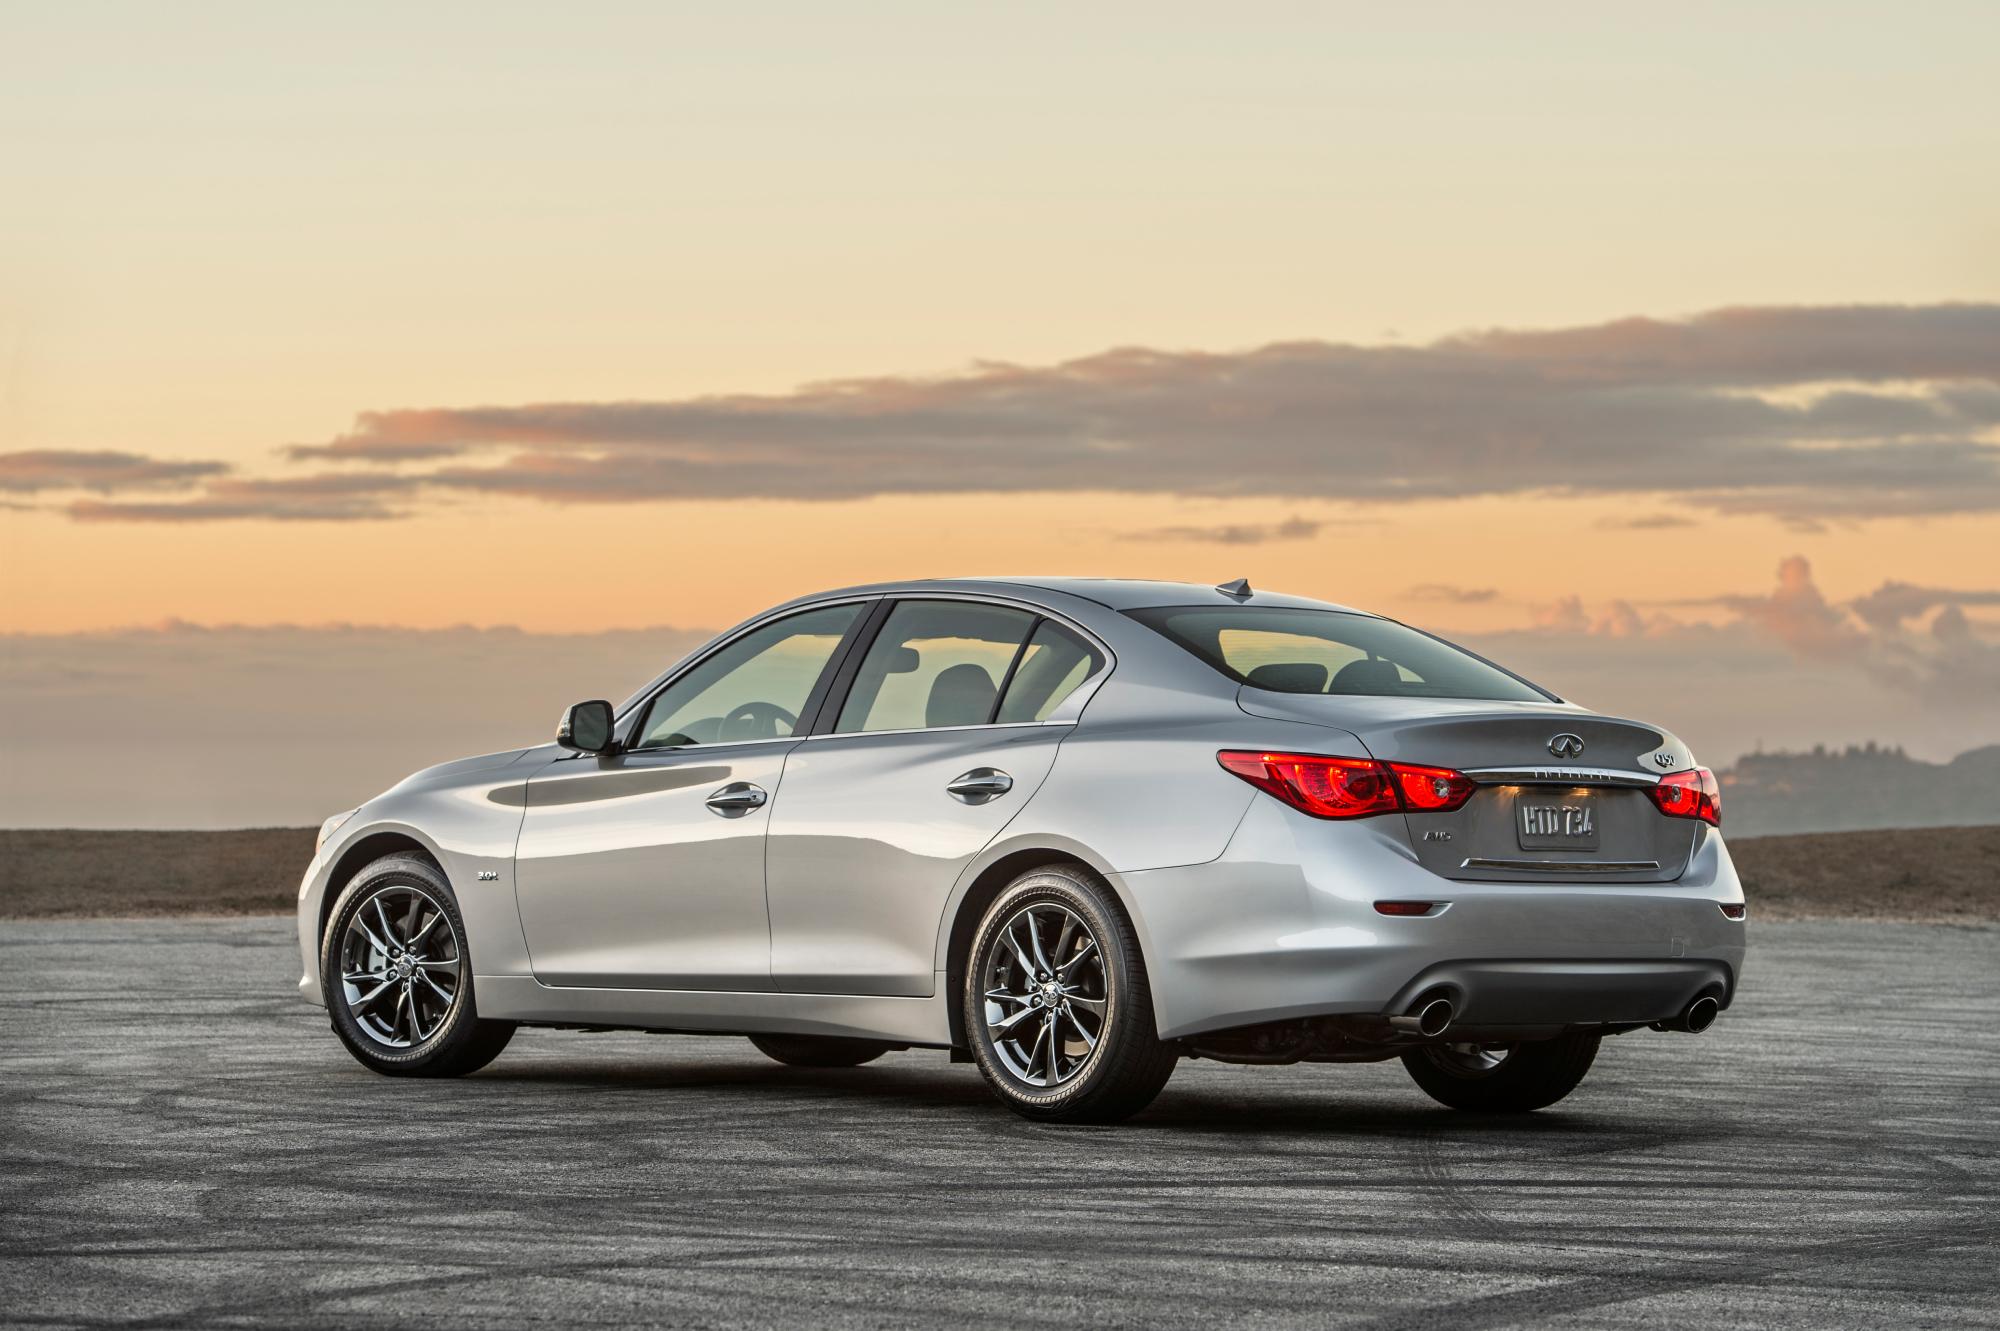 The 2017 Infiniti Q50 3.0t Signature Edition was remarkably priced at its launch and continues to offer performance, comfort, and affordability, with sleek looks to match.